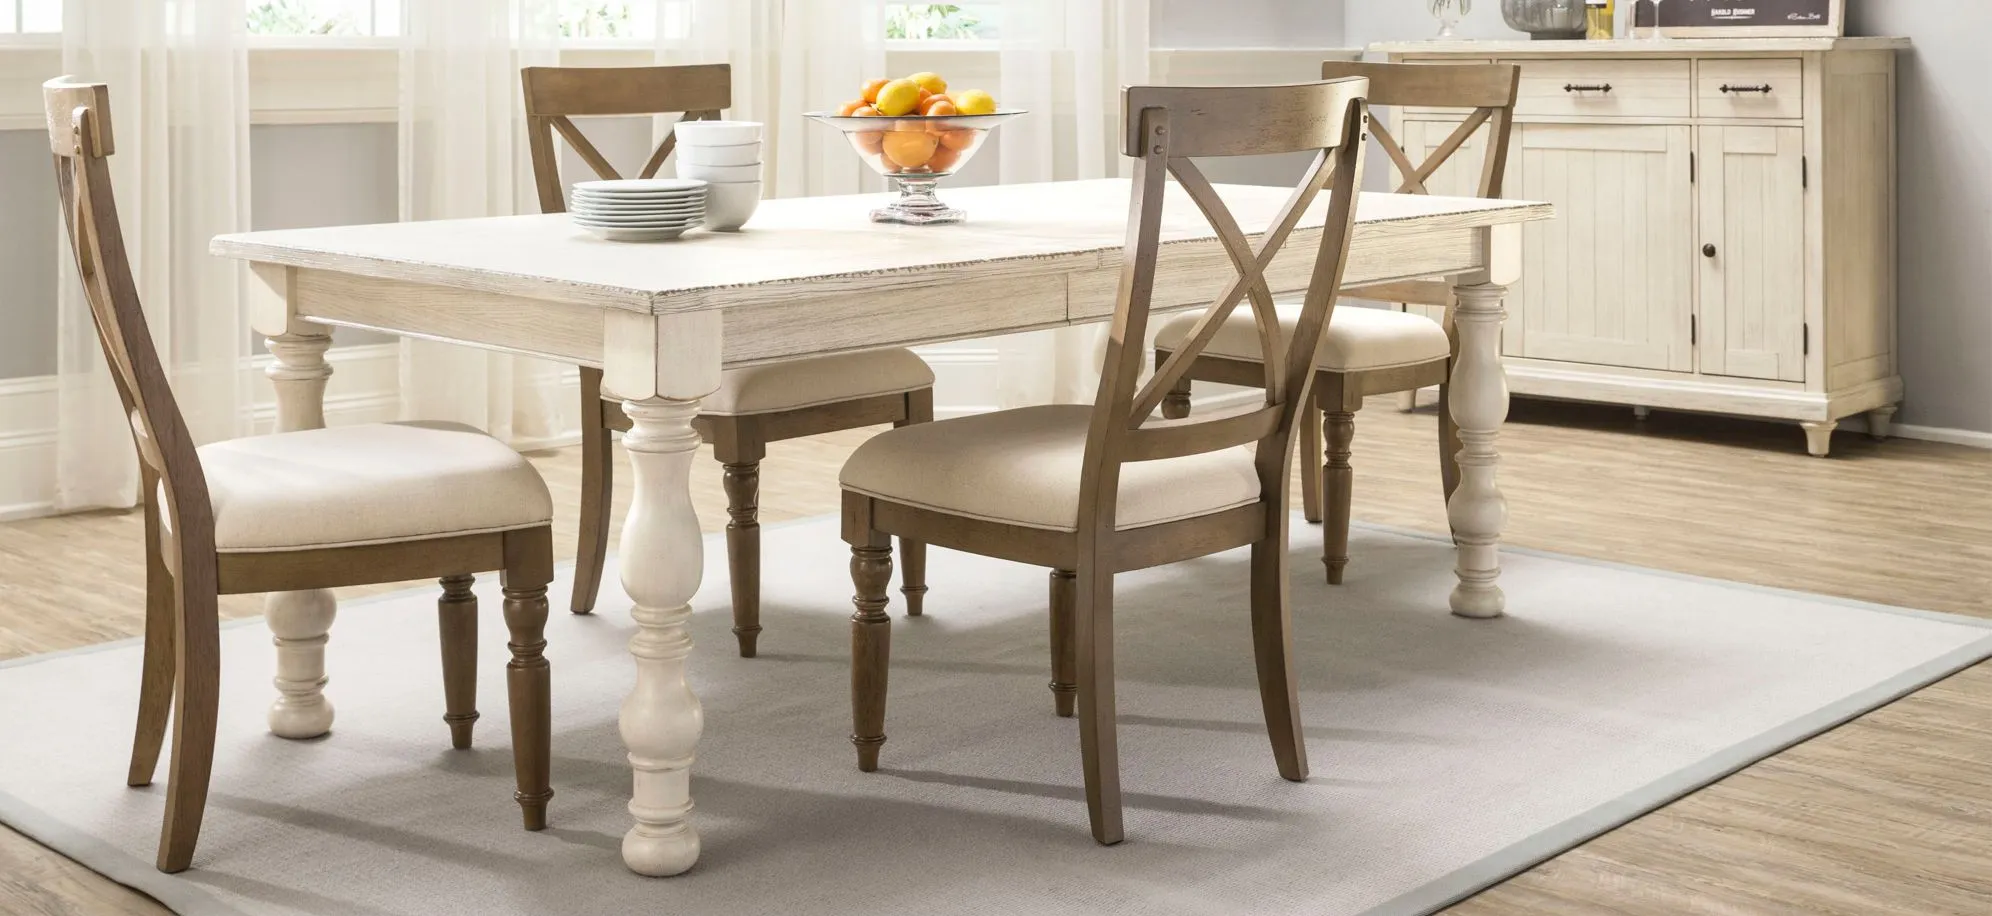 Aberdeen 5-pc. Dining Set in Beige / Weathered Worn White / Weathered by Riverside Furniture